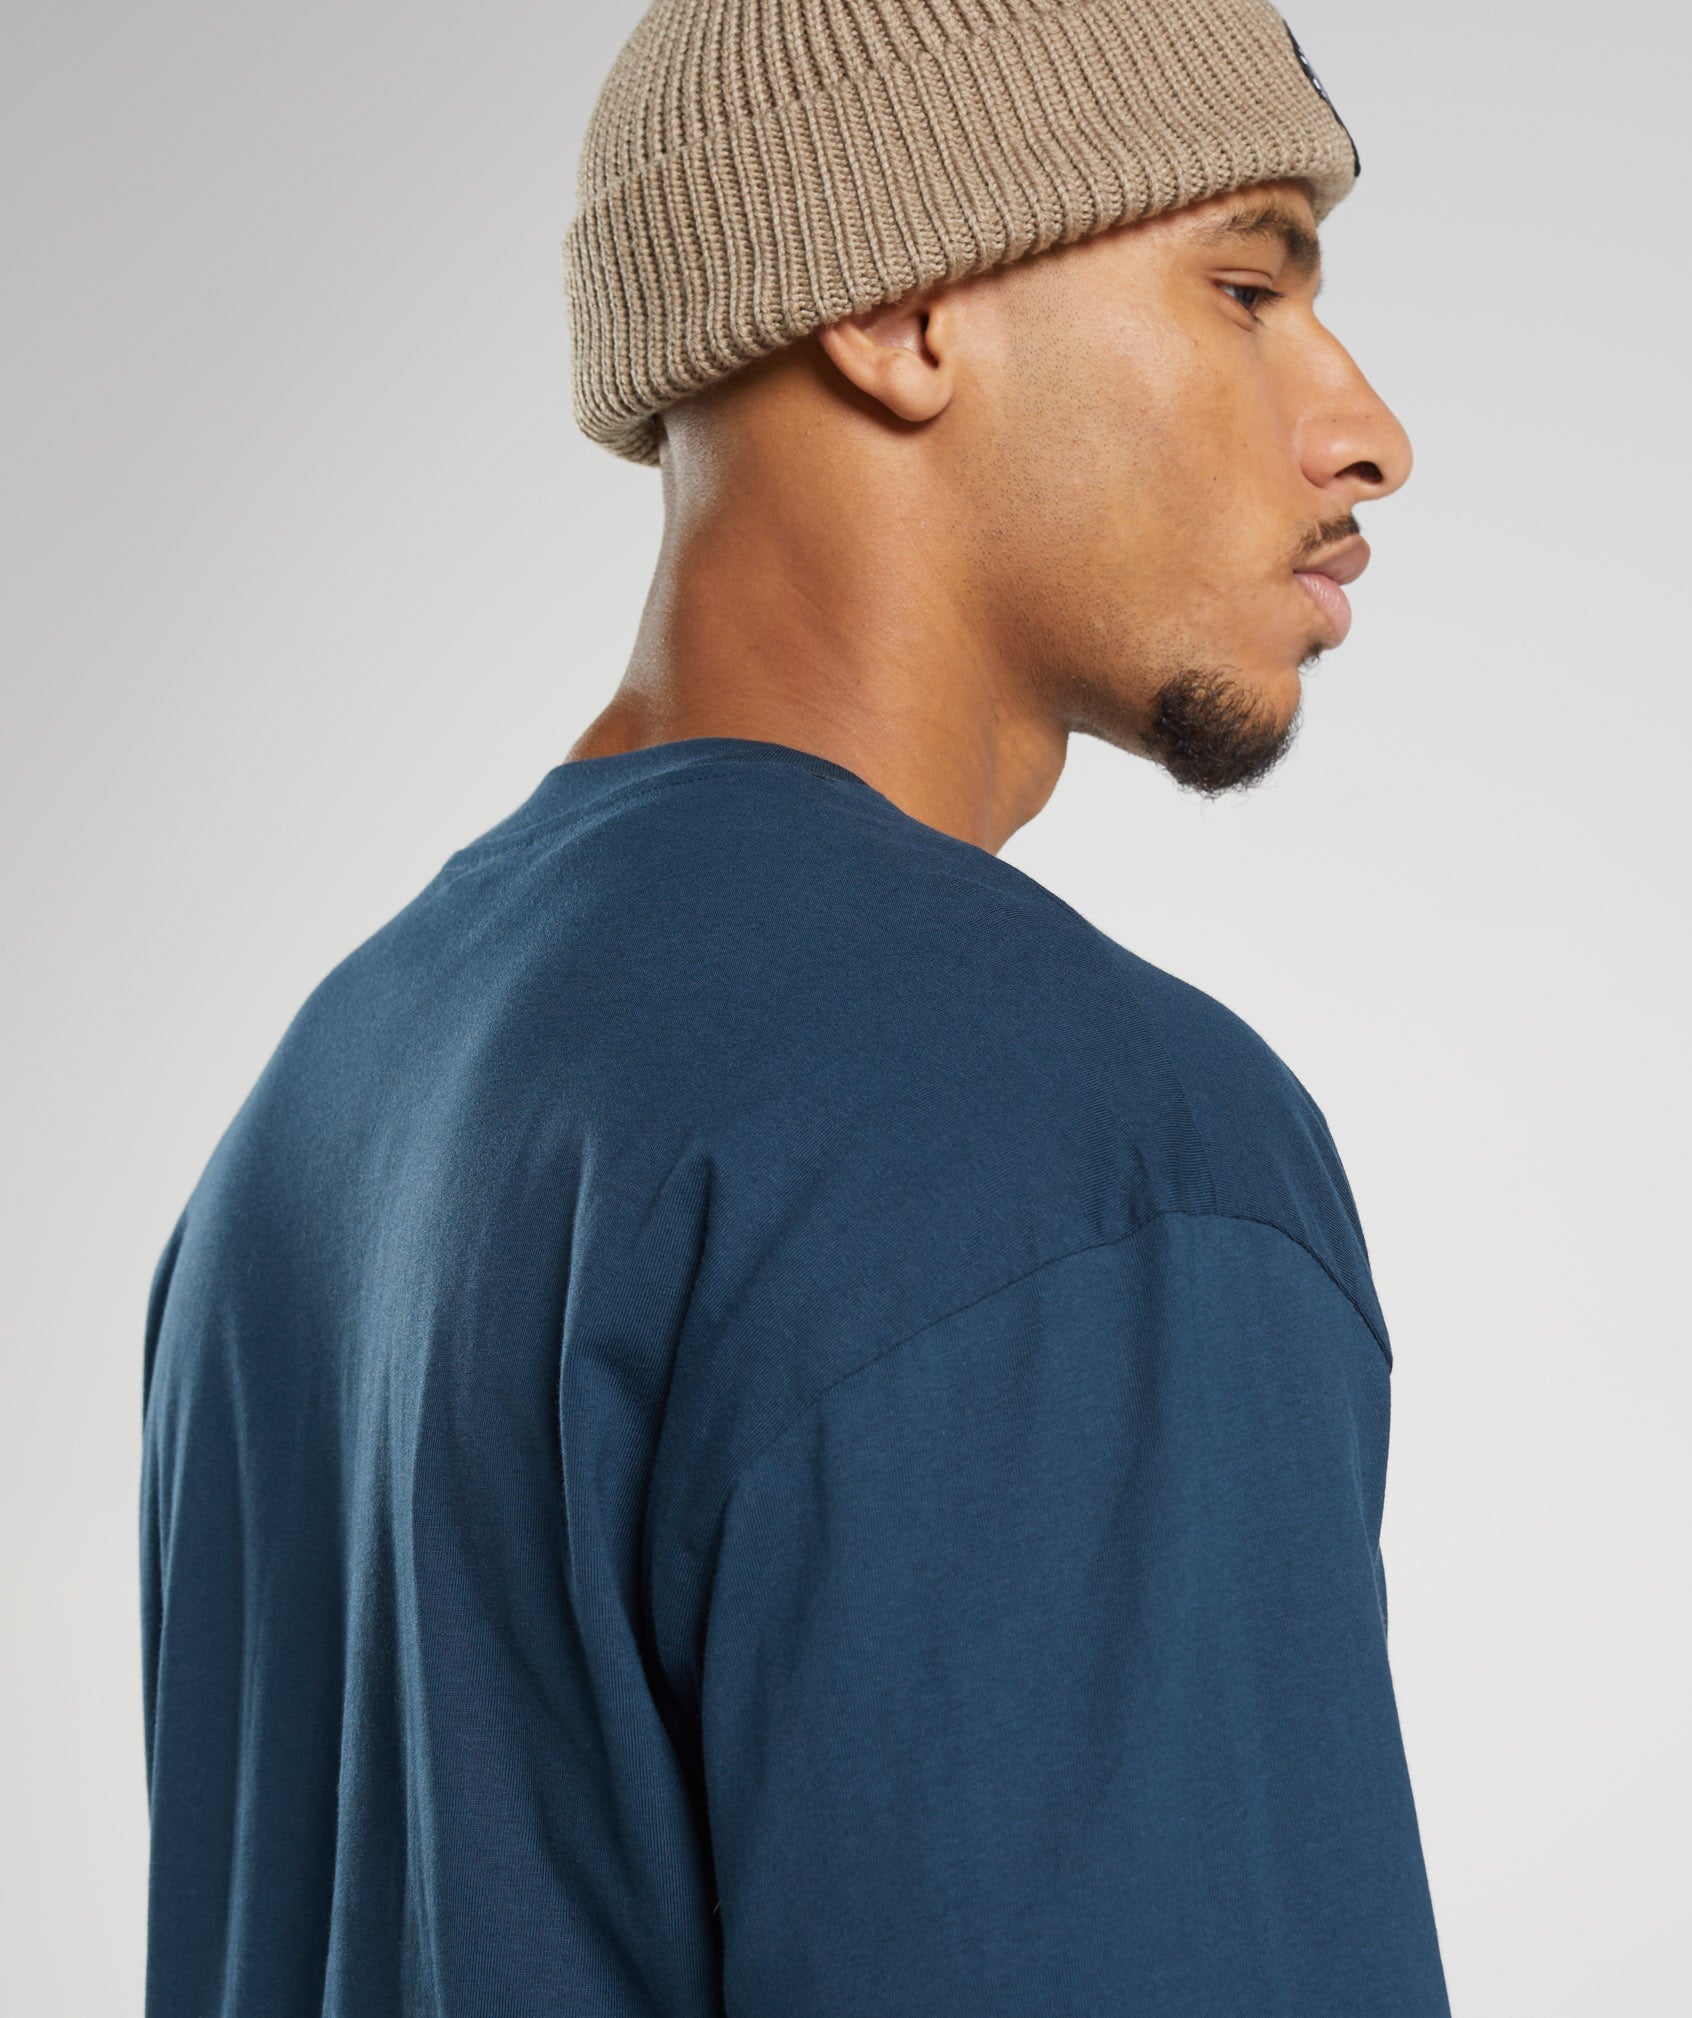 Rest Day Sweats Long Sleeve T-Shirt in Navy